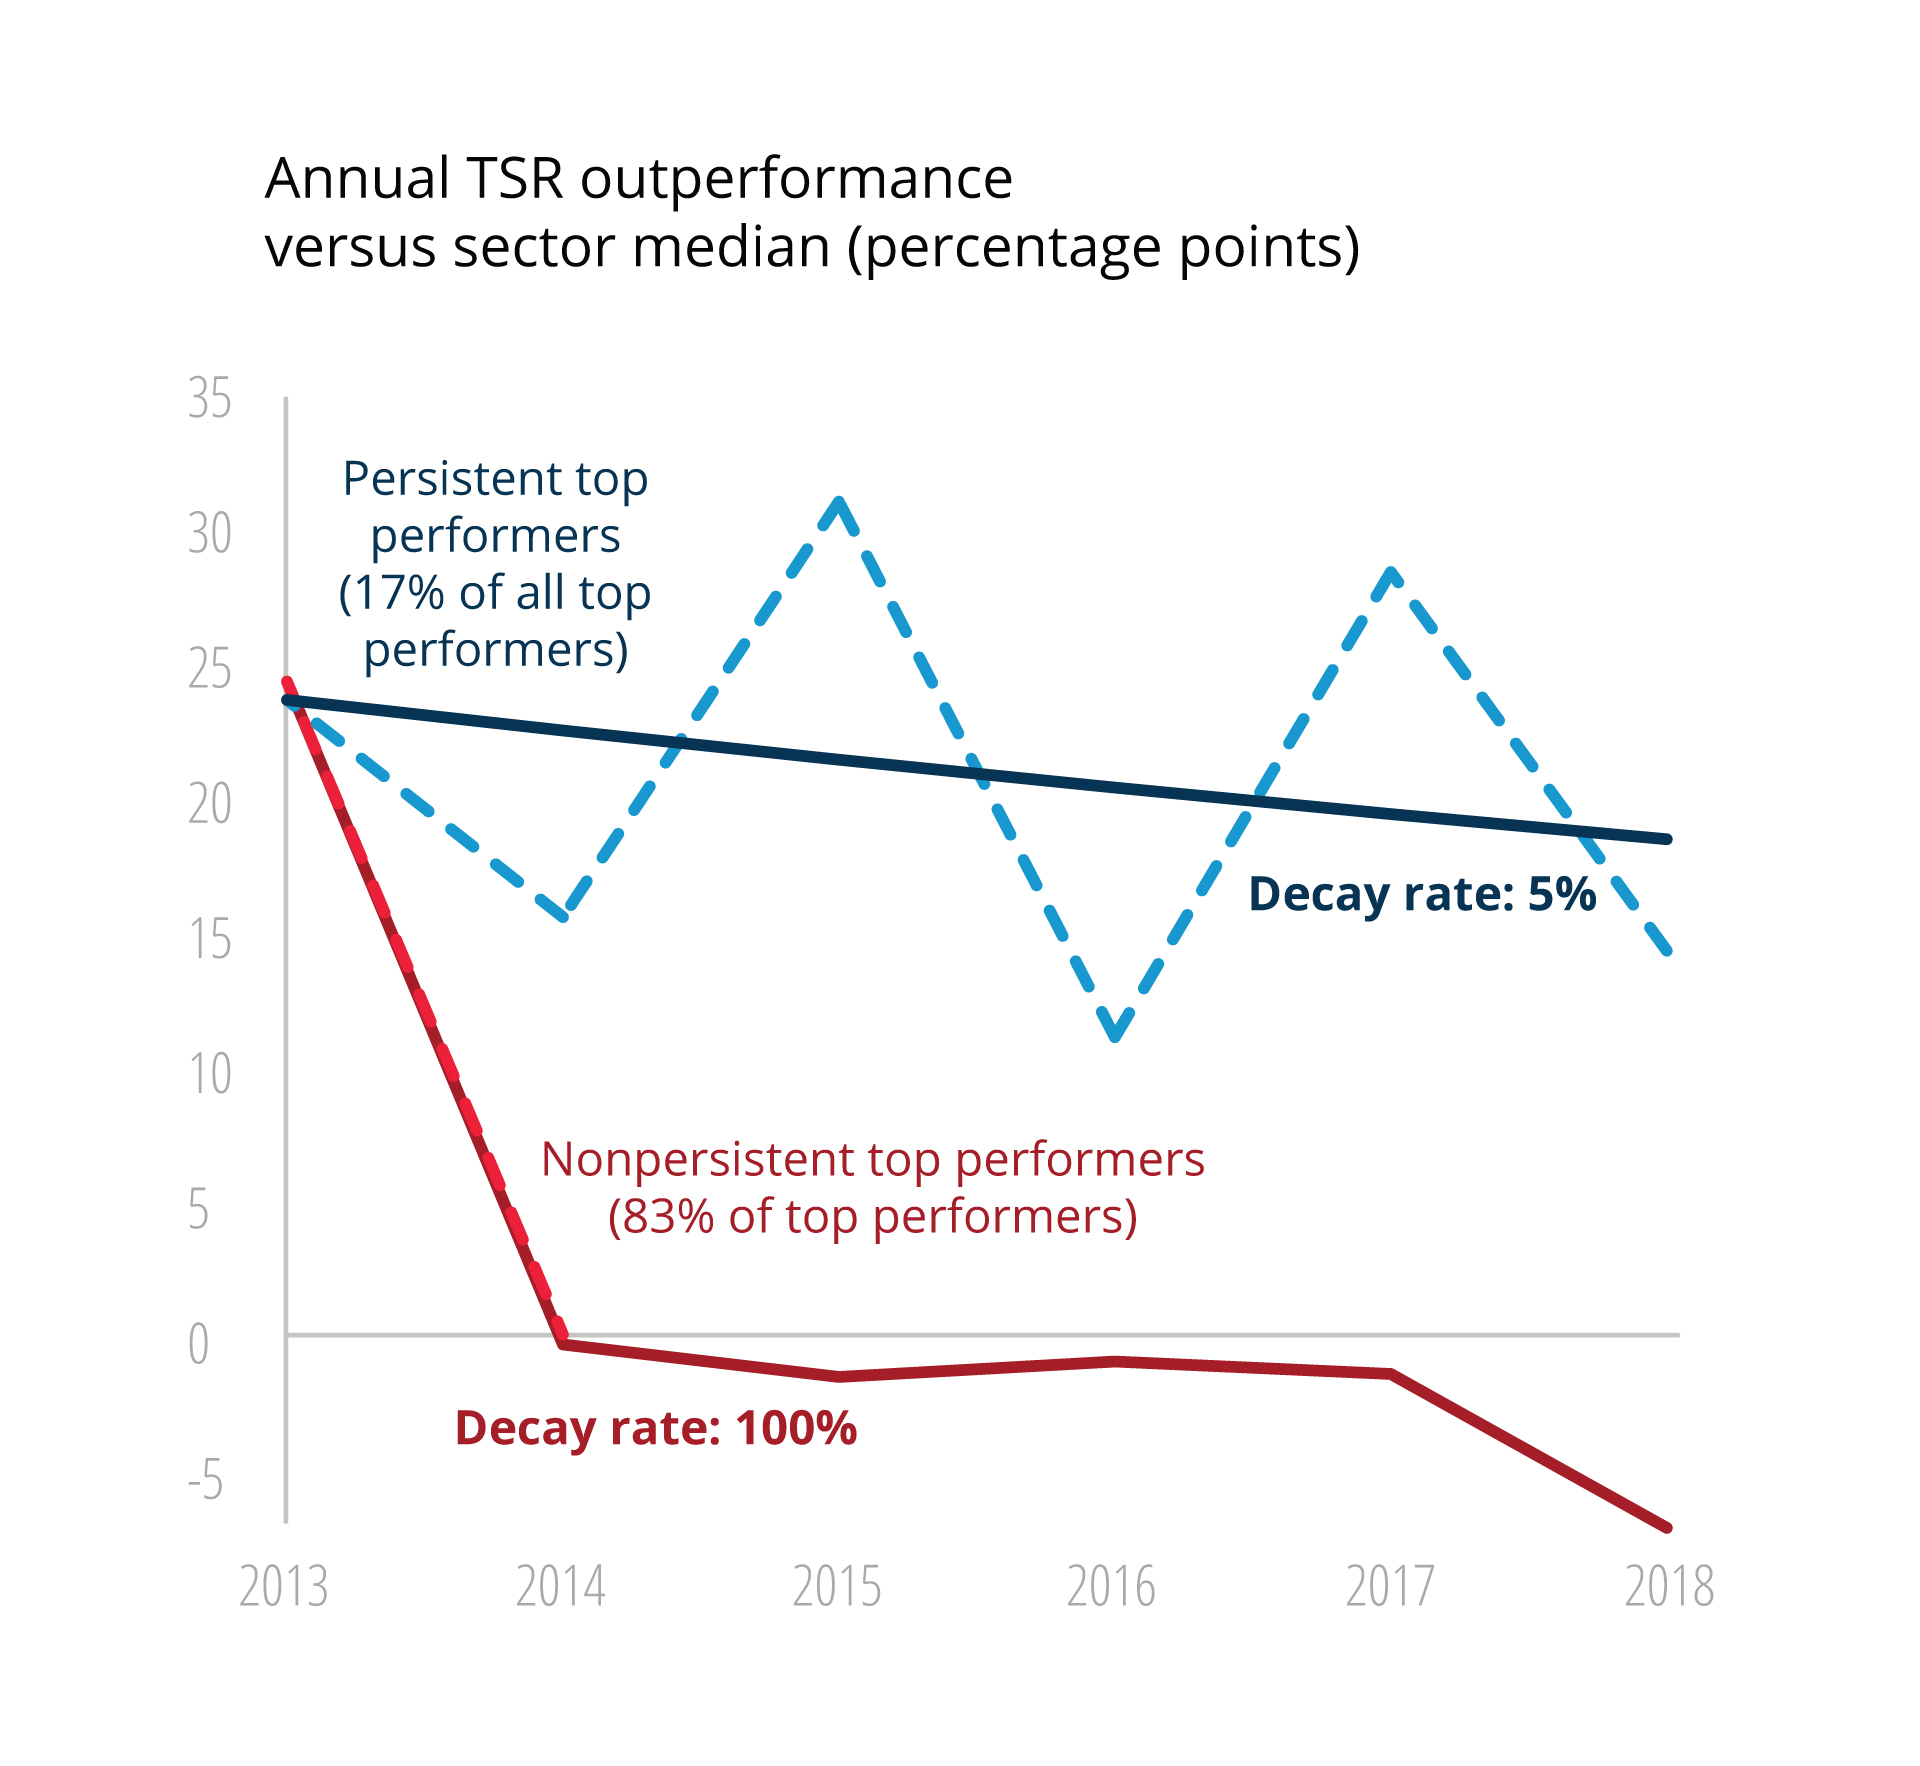 A Minority of Companies Manage to Consistently Outperform Their Industry Average Over Time